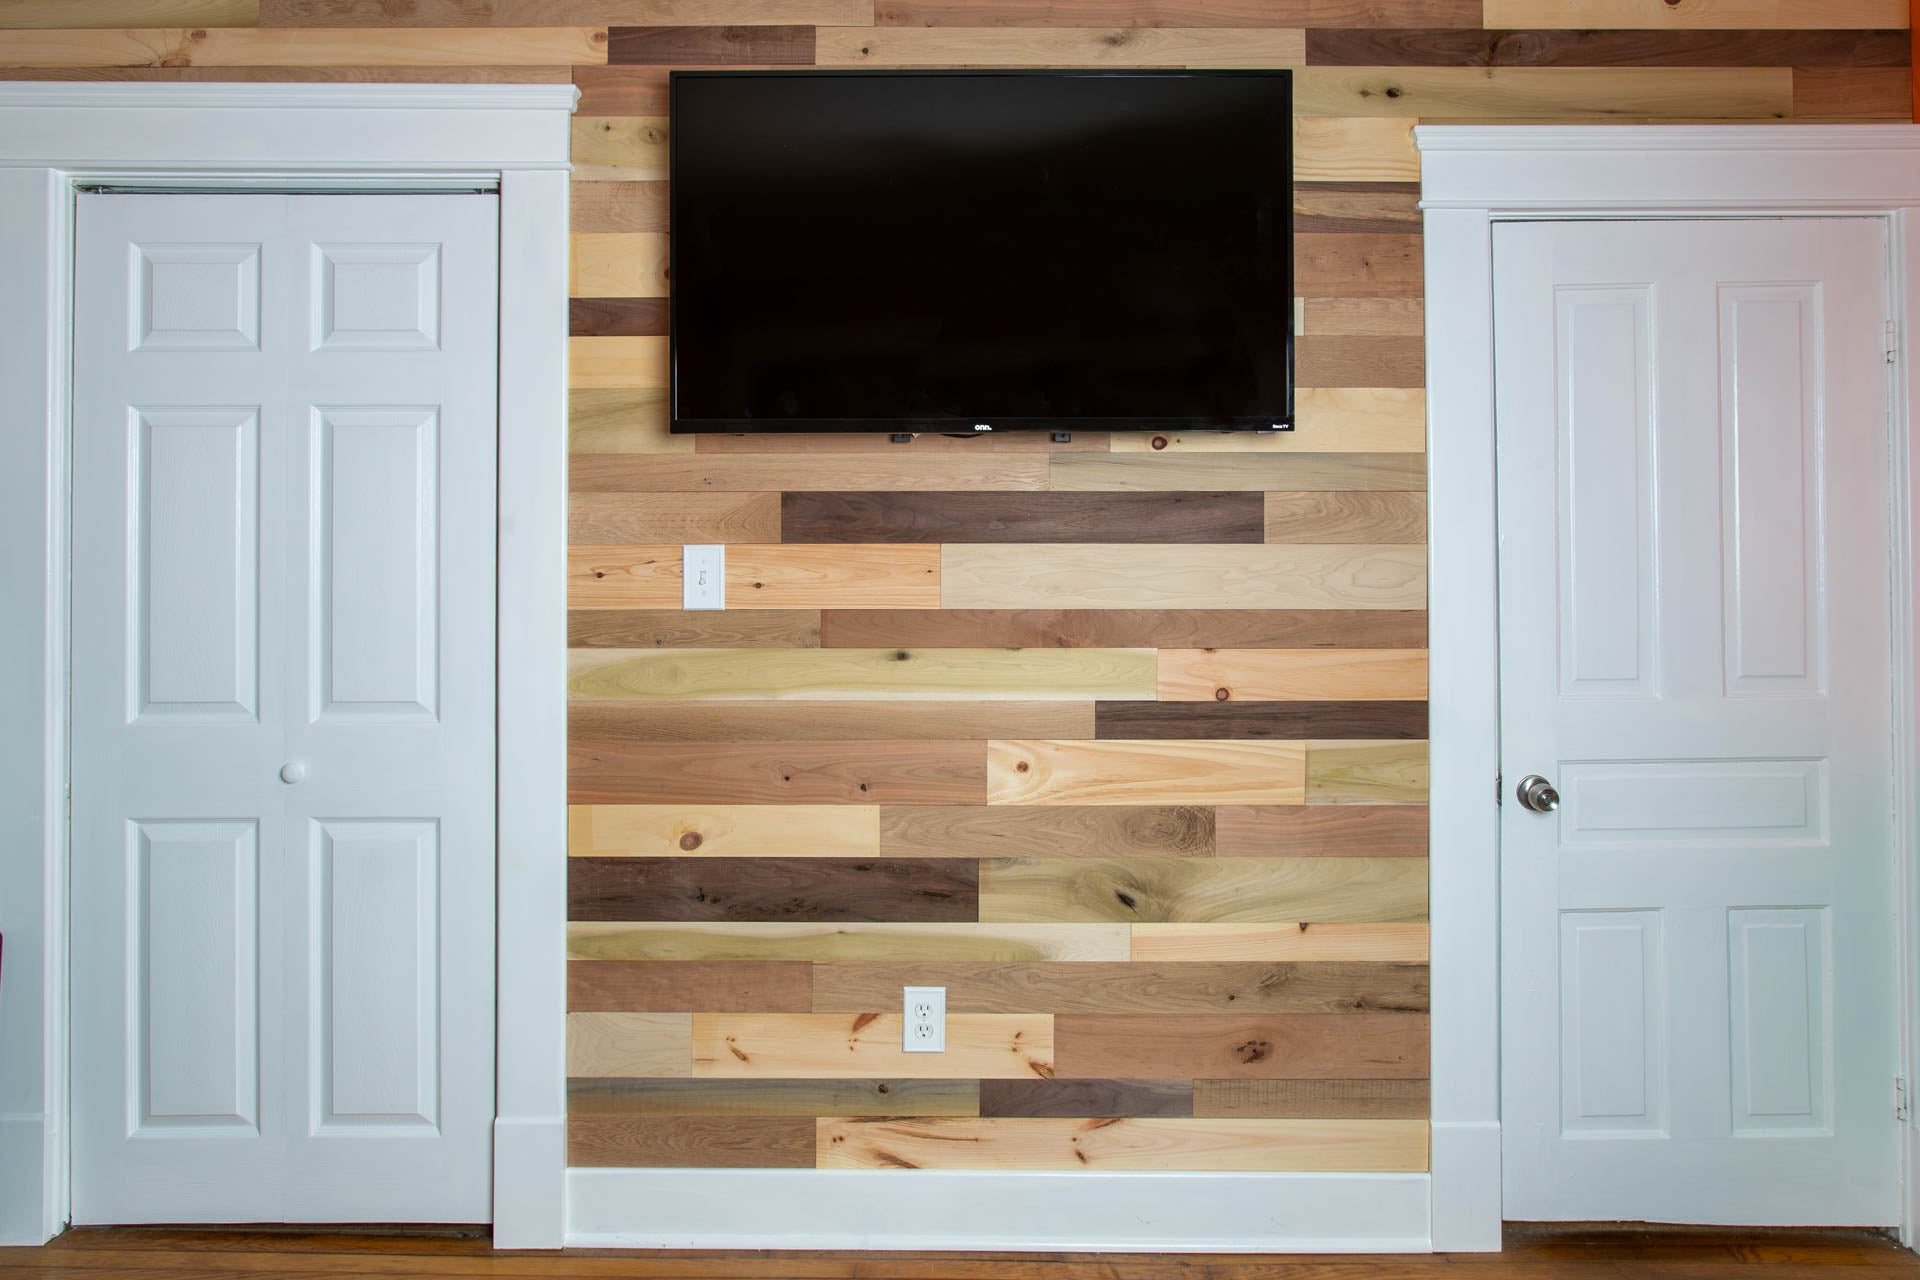 Vintage multicolored reclaimed wooden bedroom wall with a mounted TV between two closet doors.